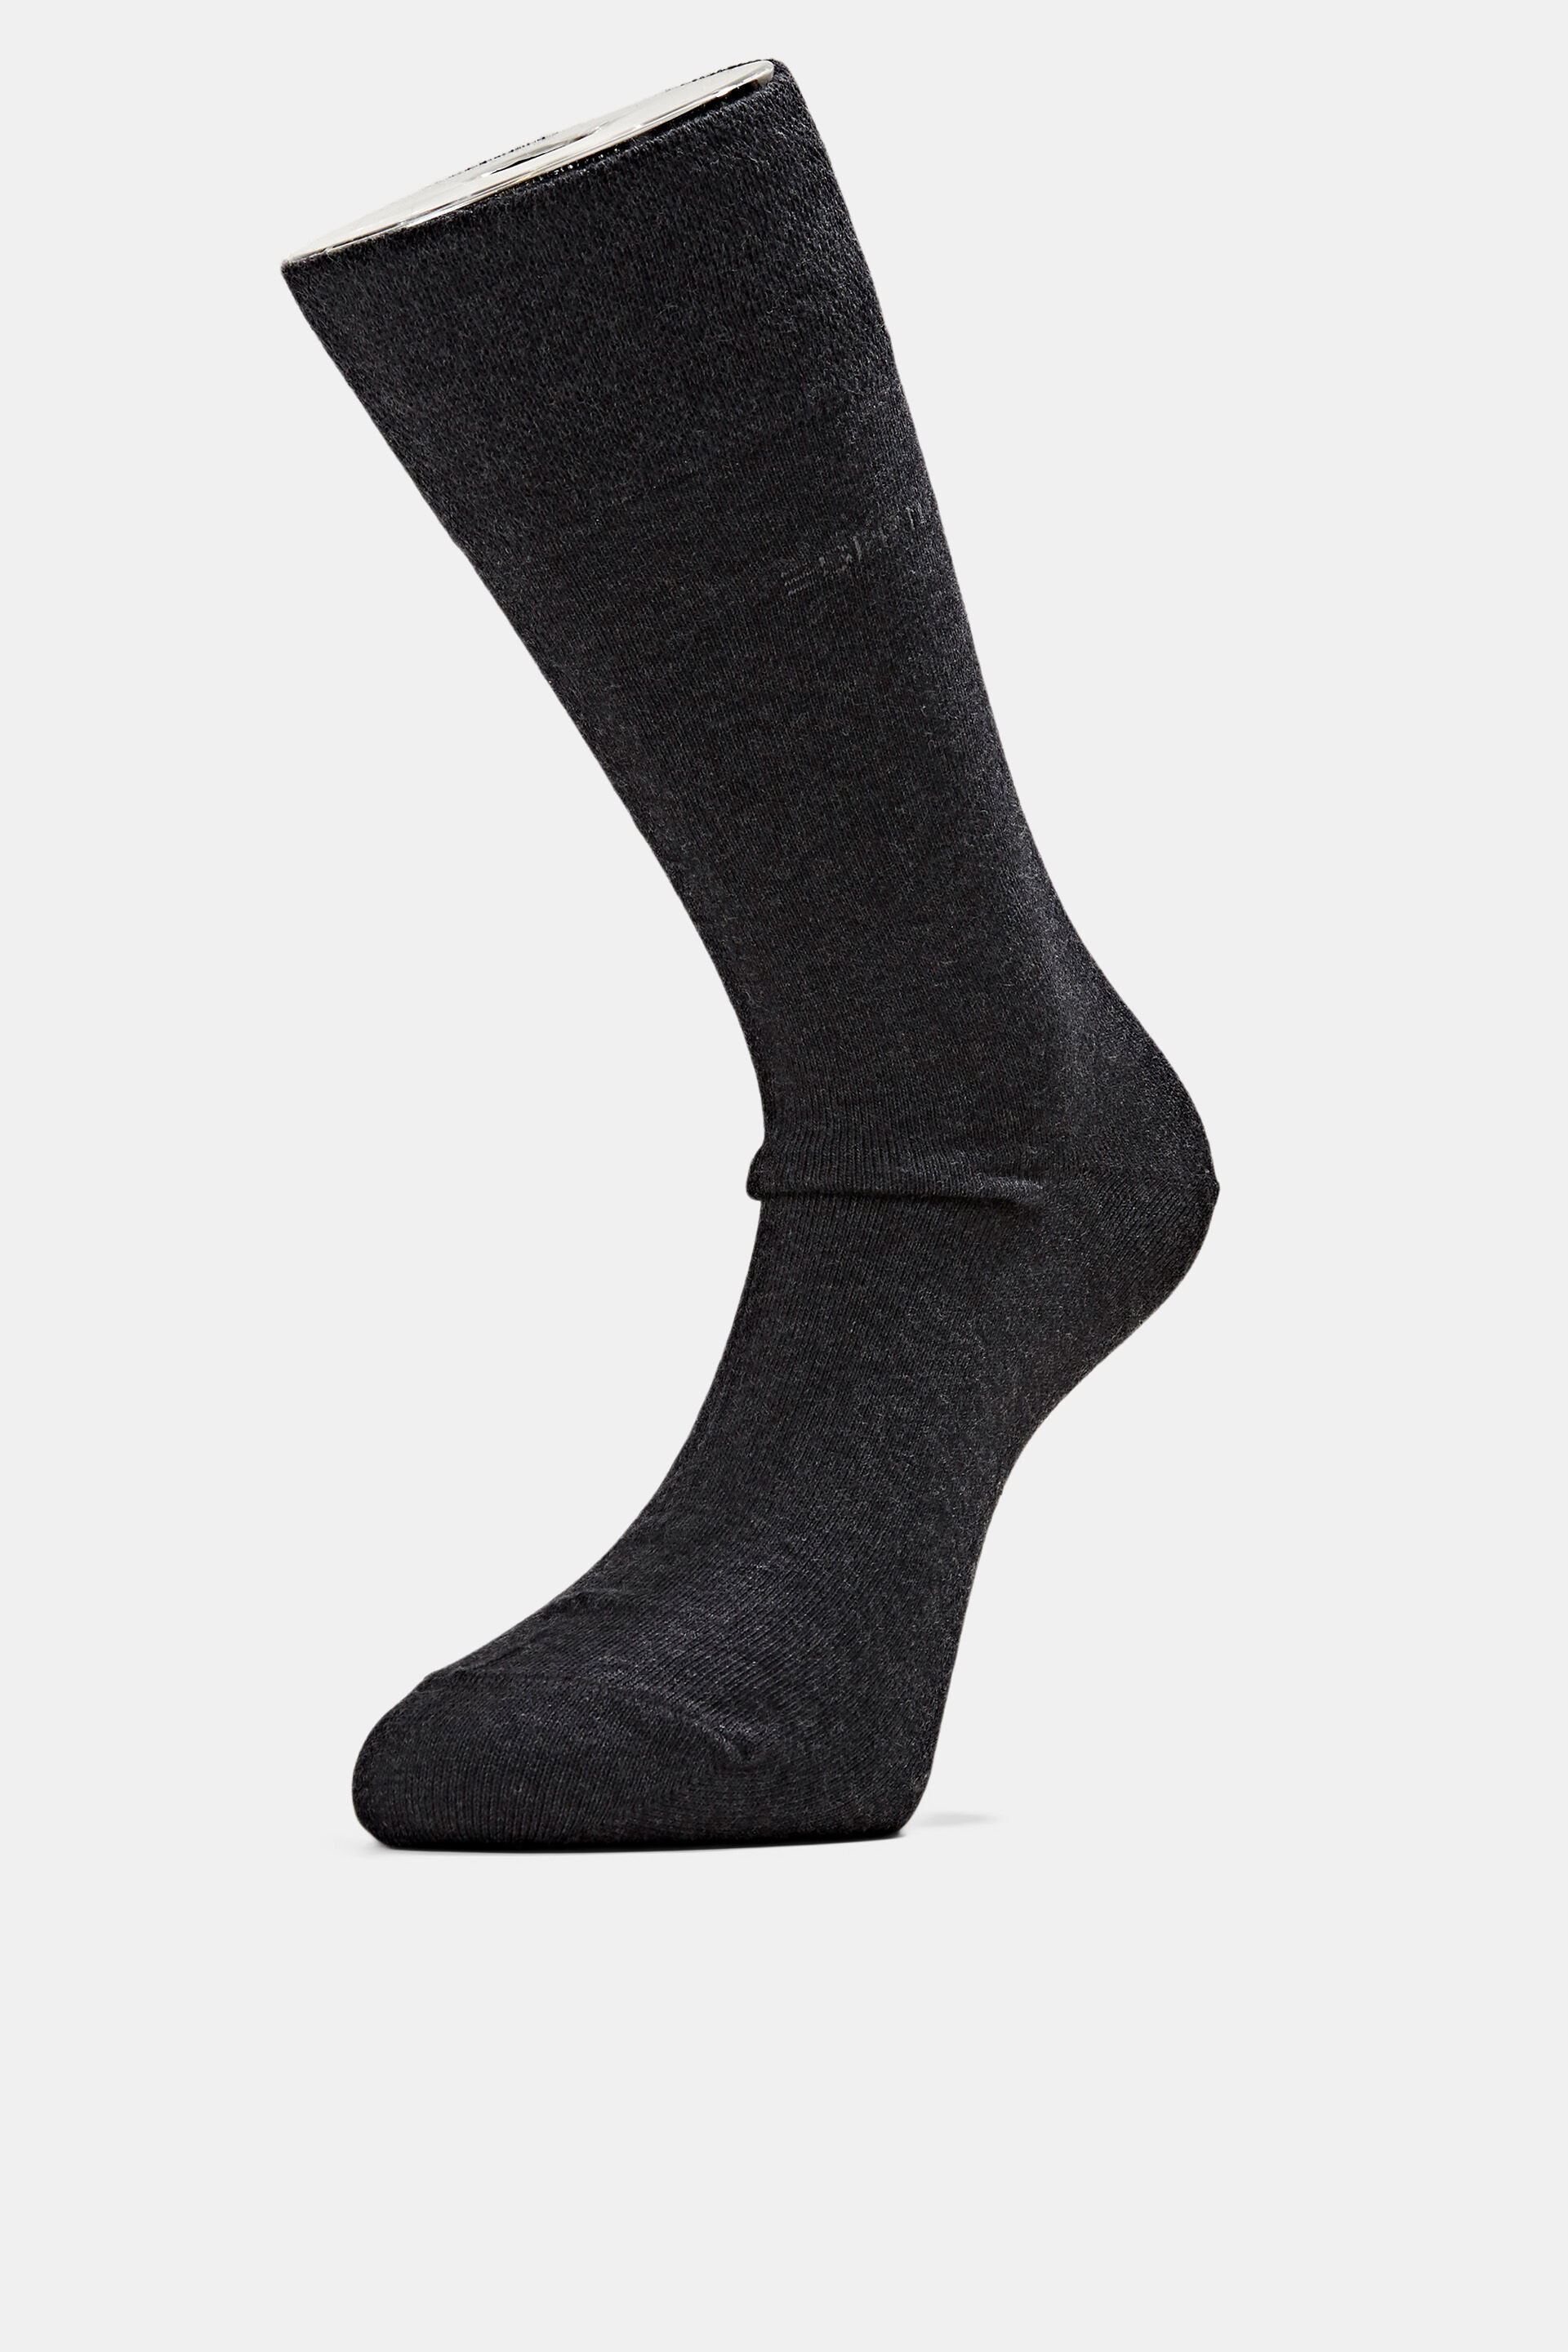 Esprit organic with of blended pack cotton soft Double cuffs, socks